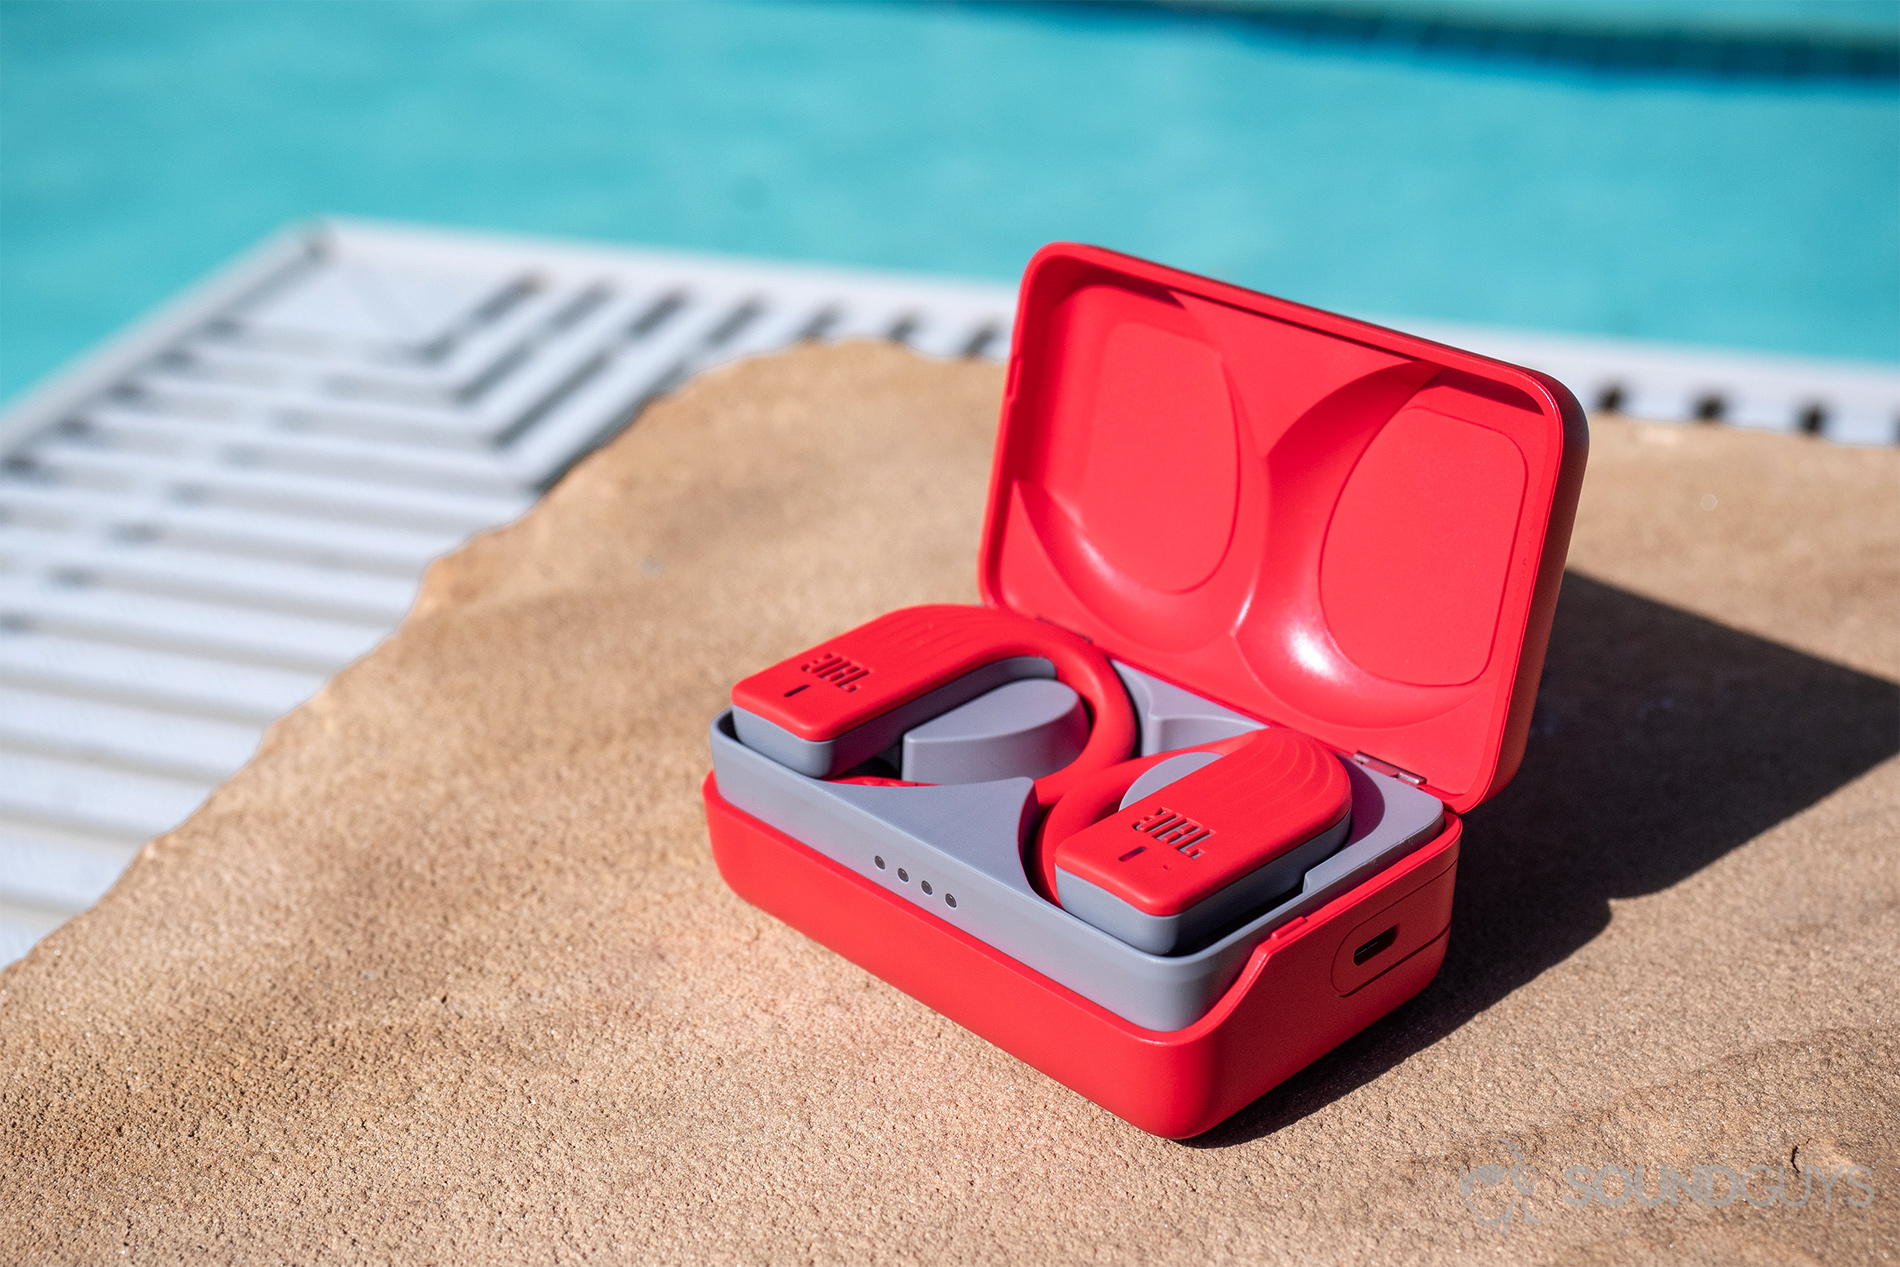 JBL Endurance Peak: The earbuds in the case on pool grounds, with a pool in the background.